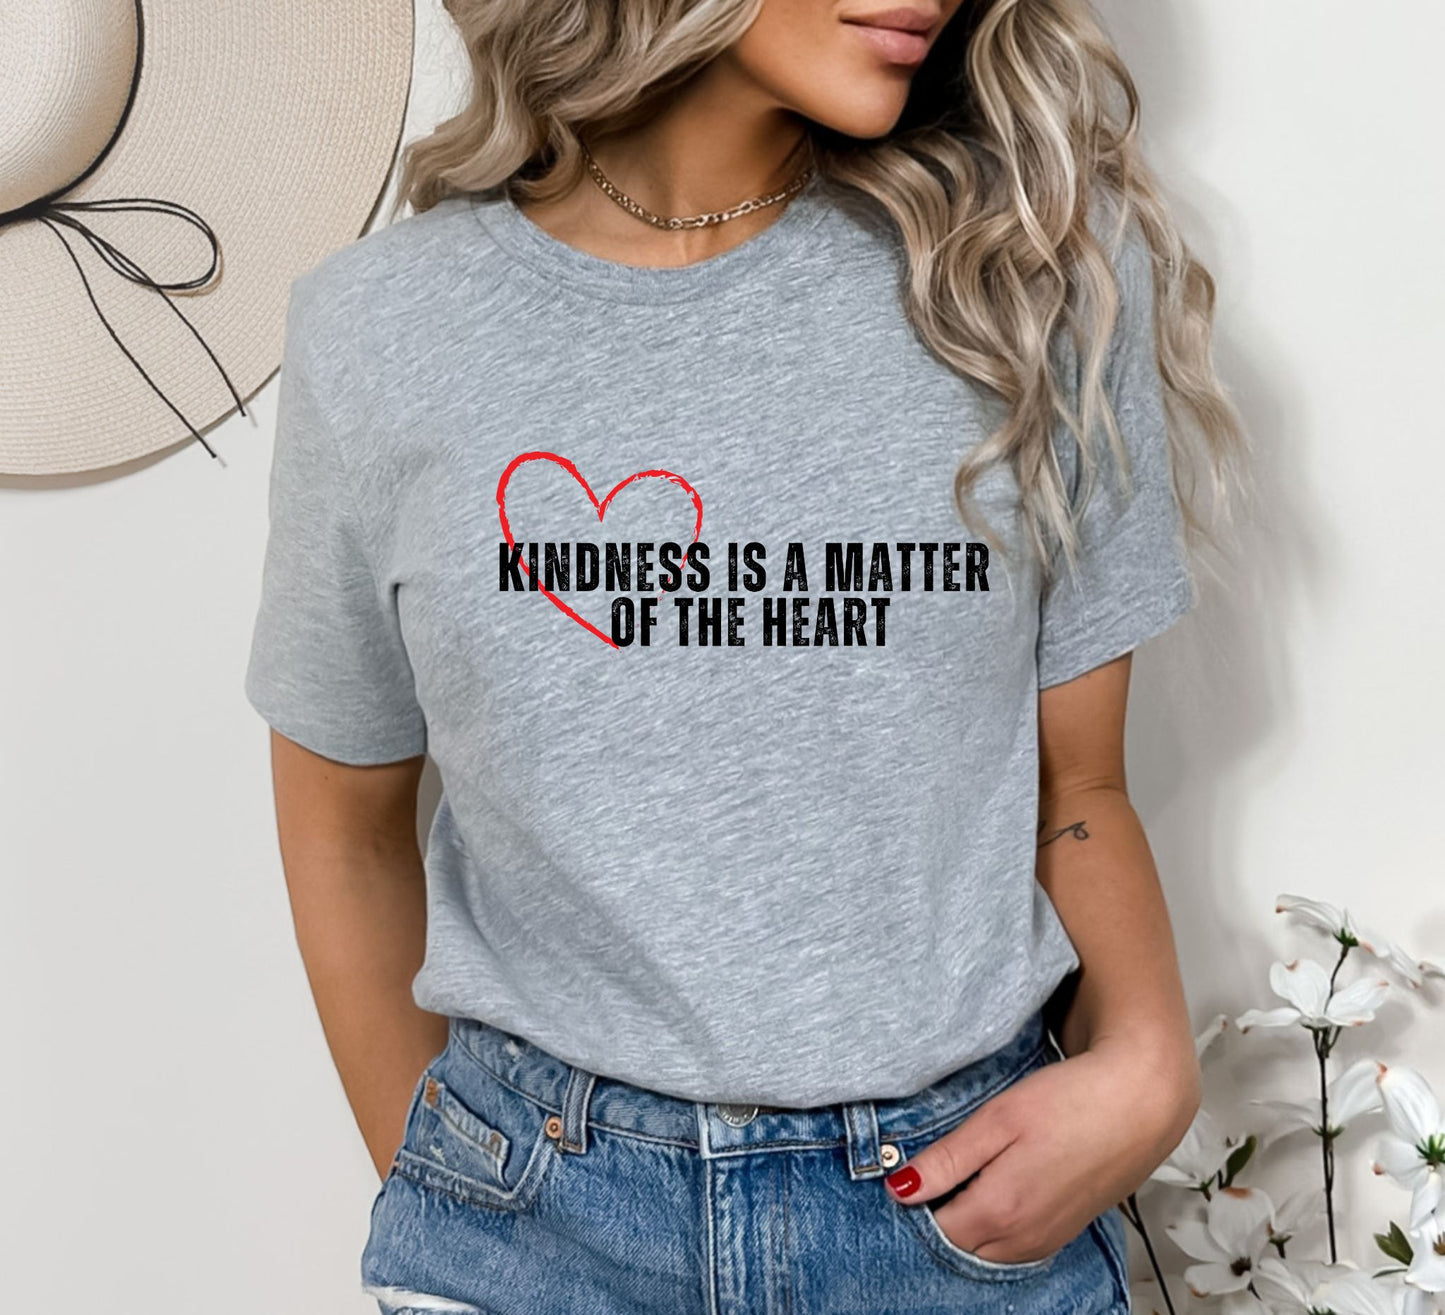 Kindness is a Matter of the Heart T-Shirt - I Heart You